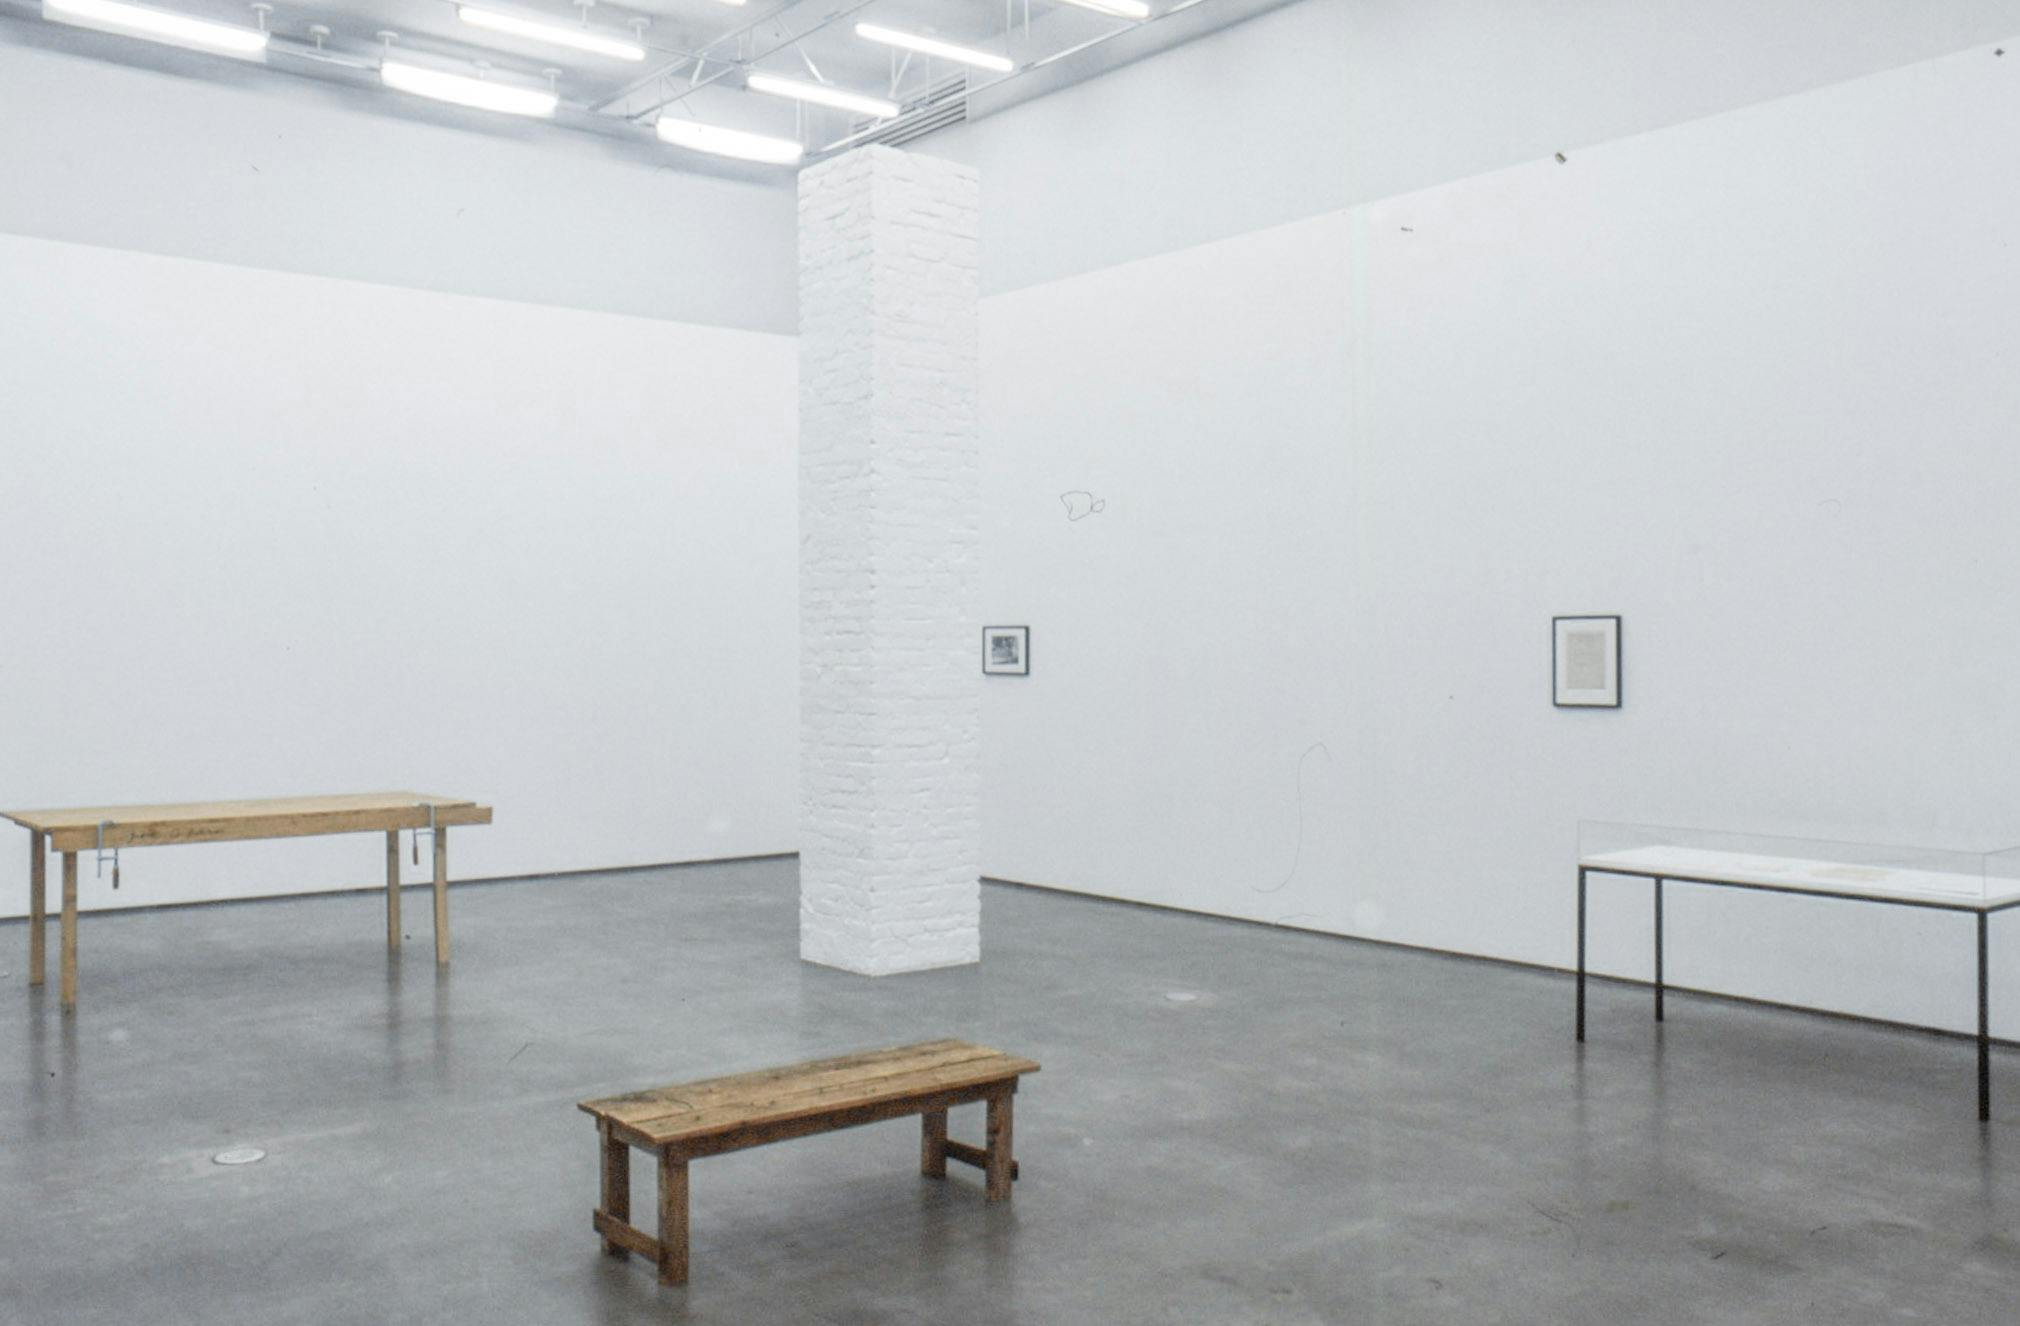 An installation image of Kirsten Pieroth’s art exhibition. At least 7 meters tall white square pillar stands in a gallery. The pillar does not reach the gallery ceiling. Several text-based and photography works are mounted on walls. 